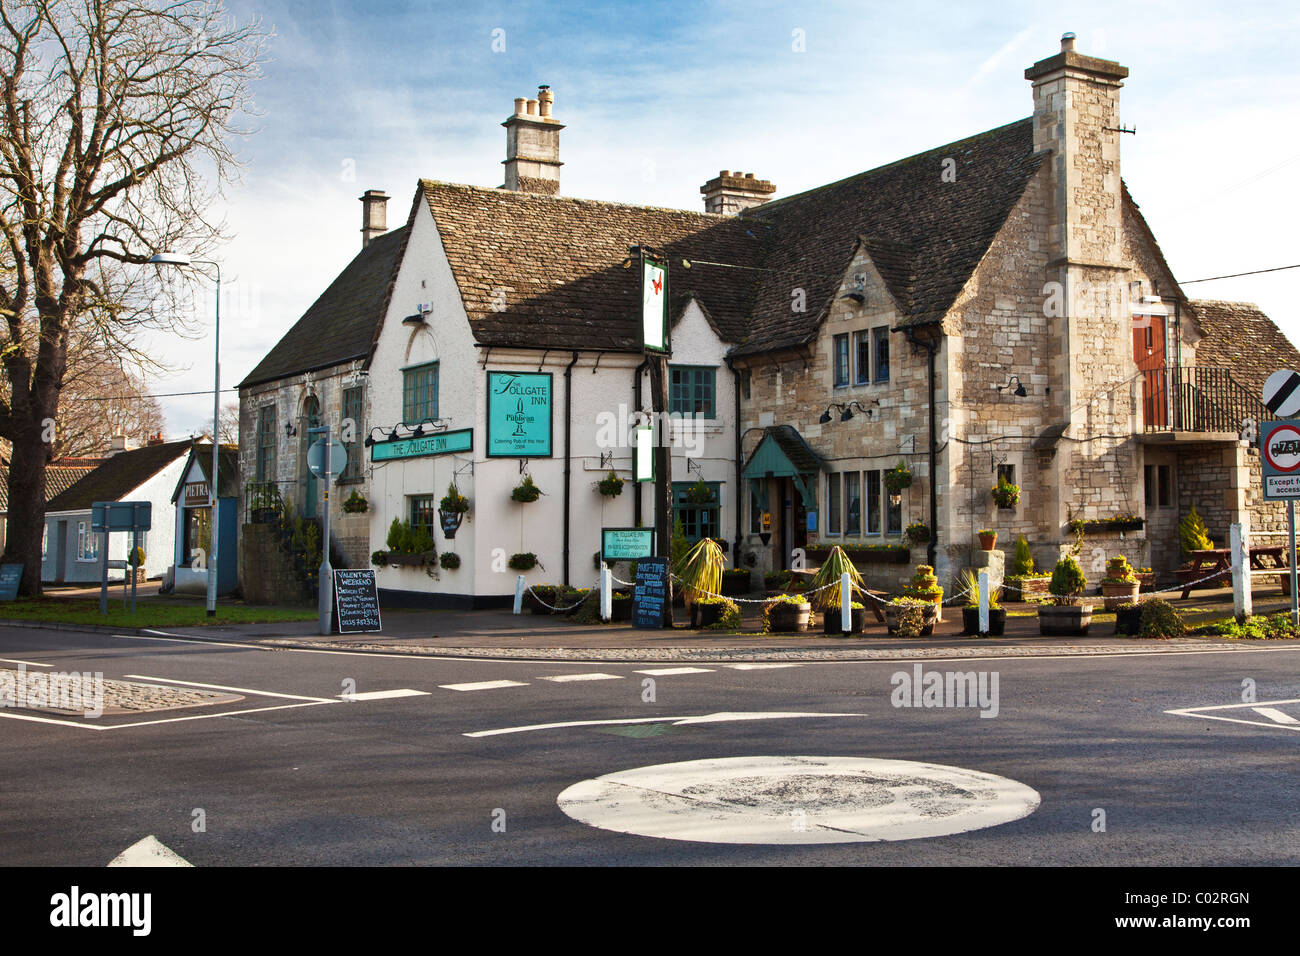 The Tollgate Inn a typical English country pub in the village of Holt, Wiltshire, England, UK Stock Photo